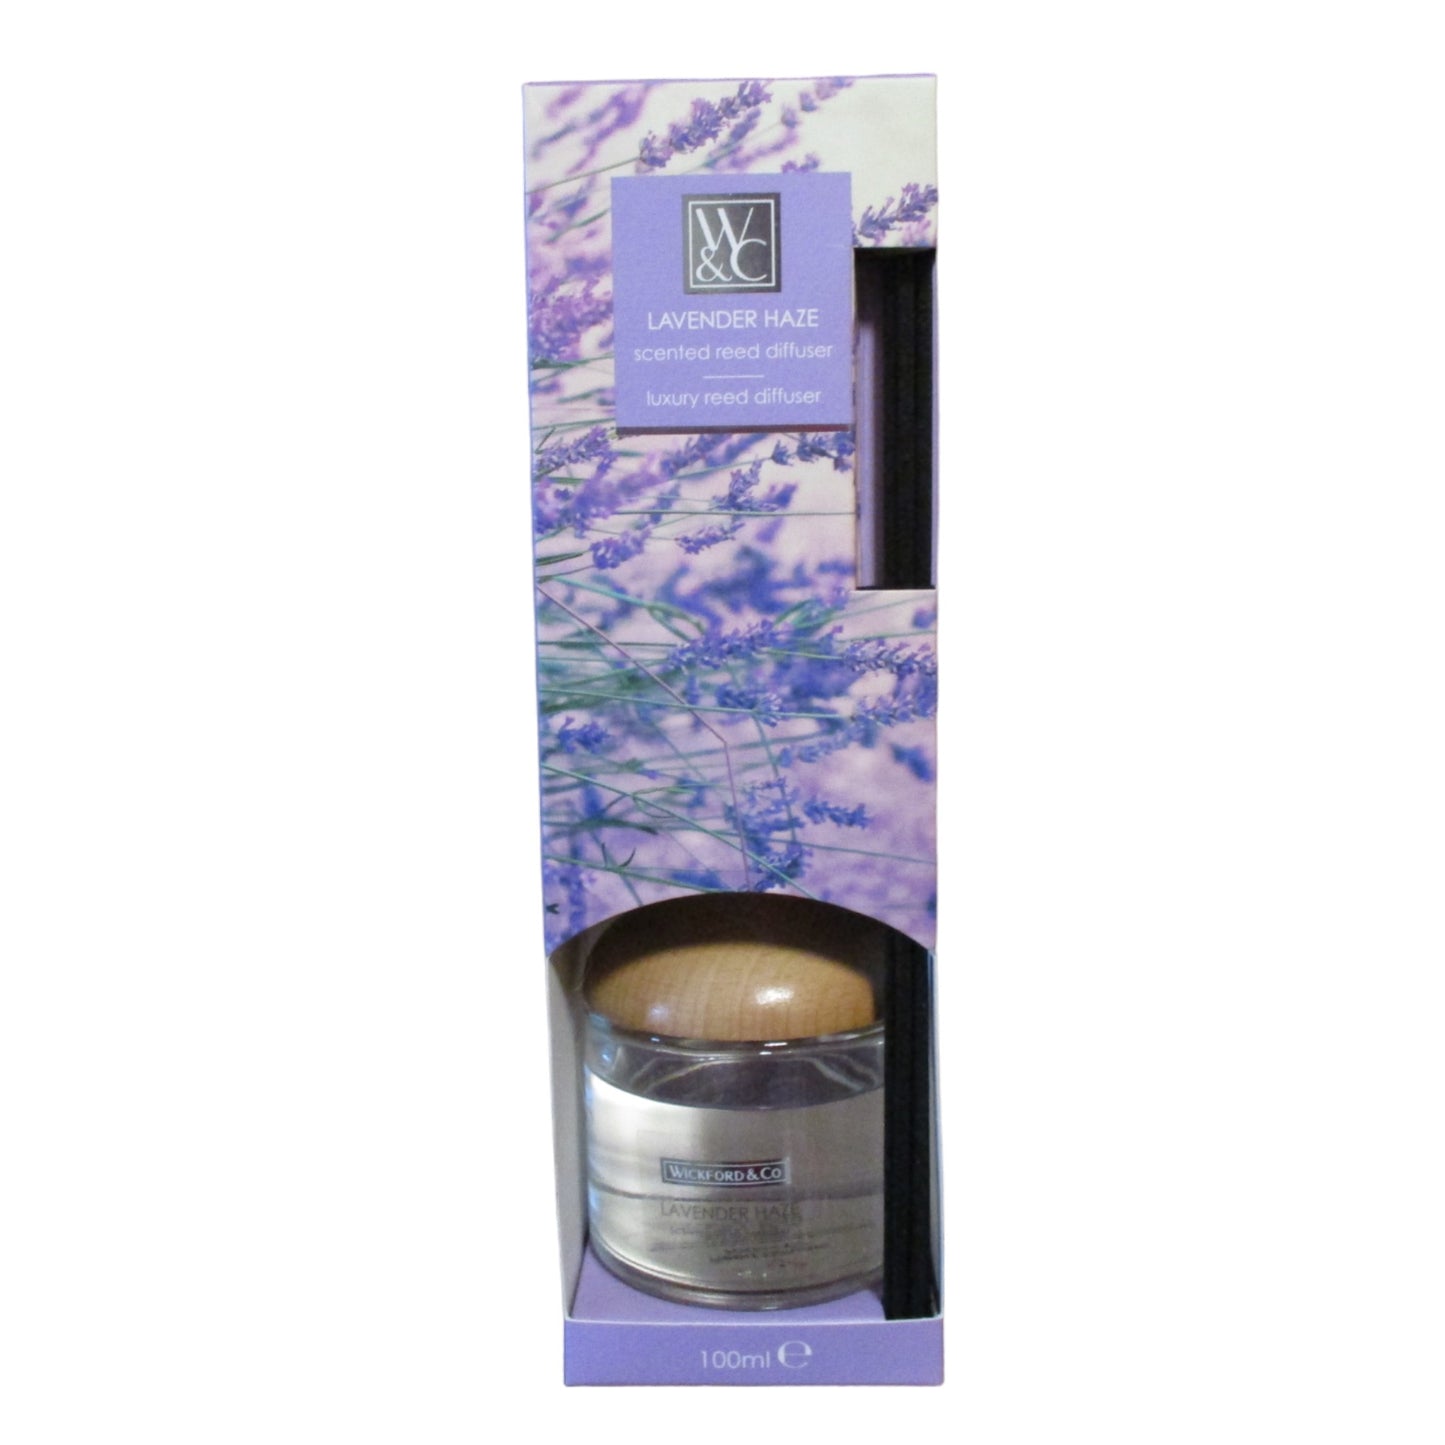 Wickford & Co - "Lavender Haze" -  Reed Diffuser Luxury Fragrance 100ml